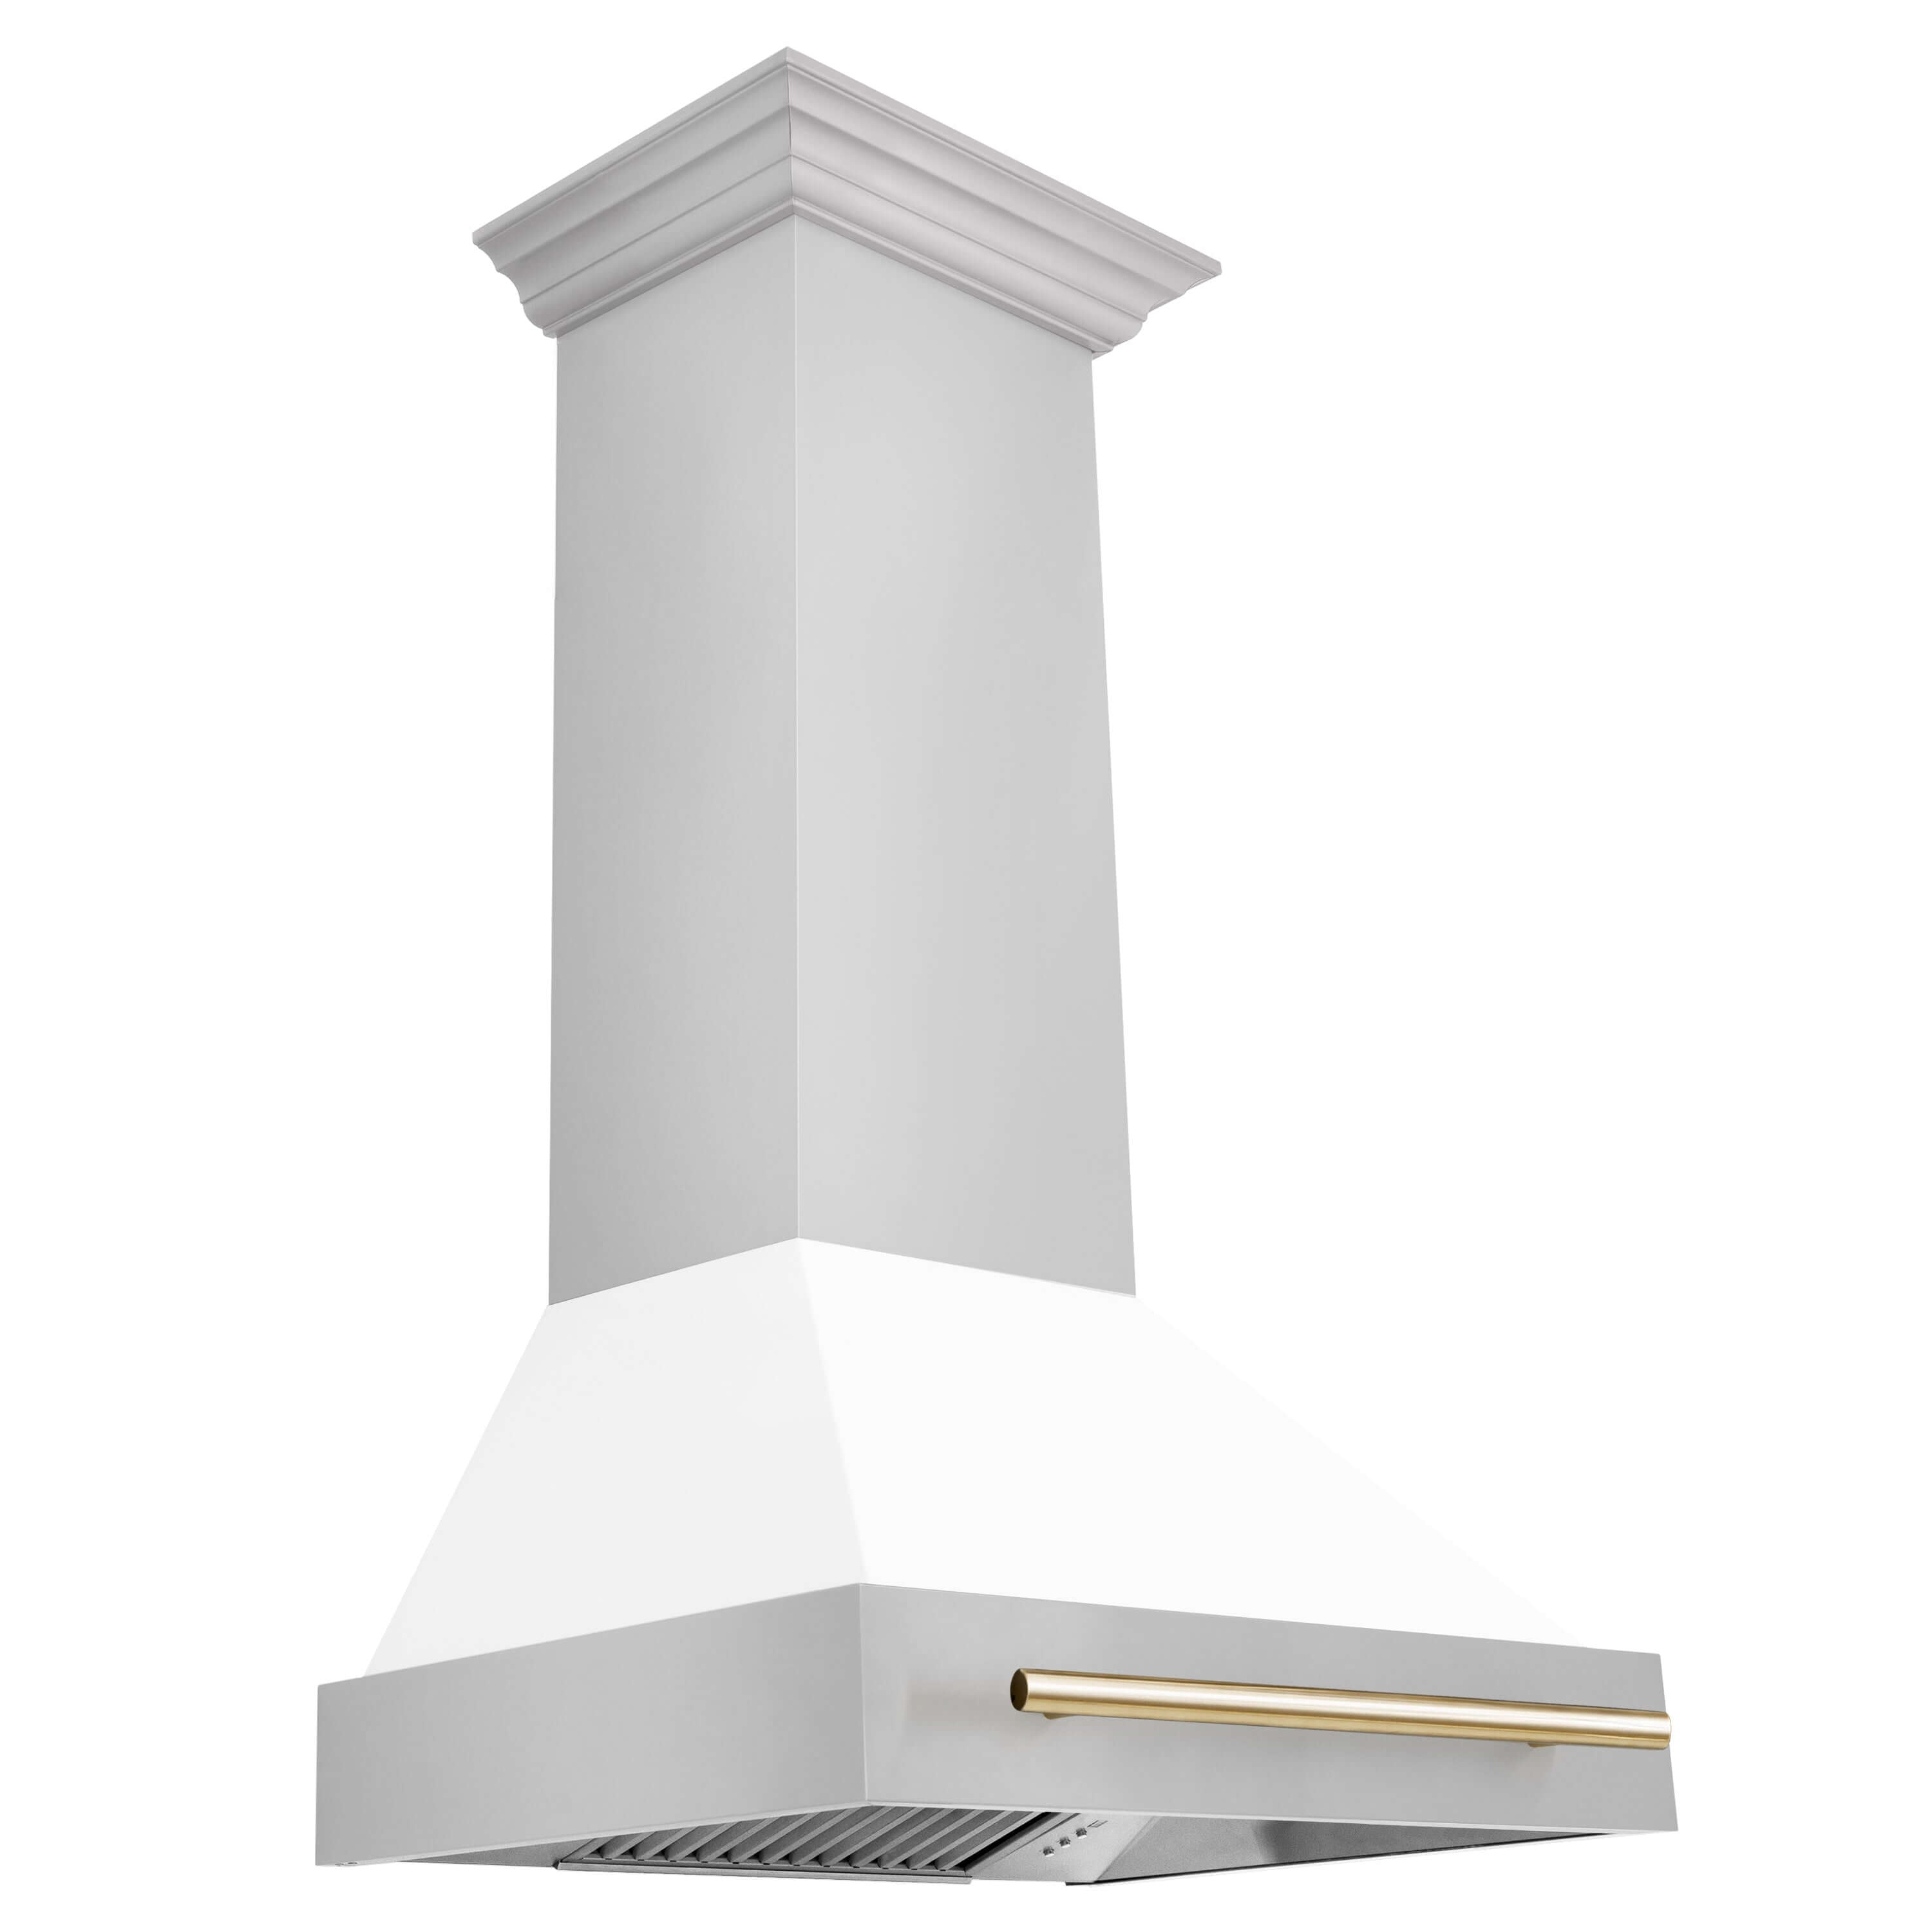 30" ZLINE Autograph Edition Stainless Steel Range Hood with White Matte Shell and Gold Handle (8654STZ-WM30-G)